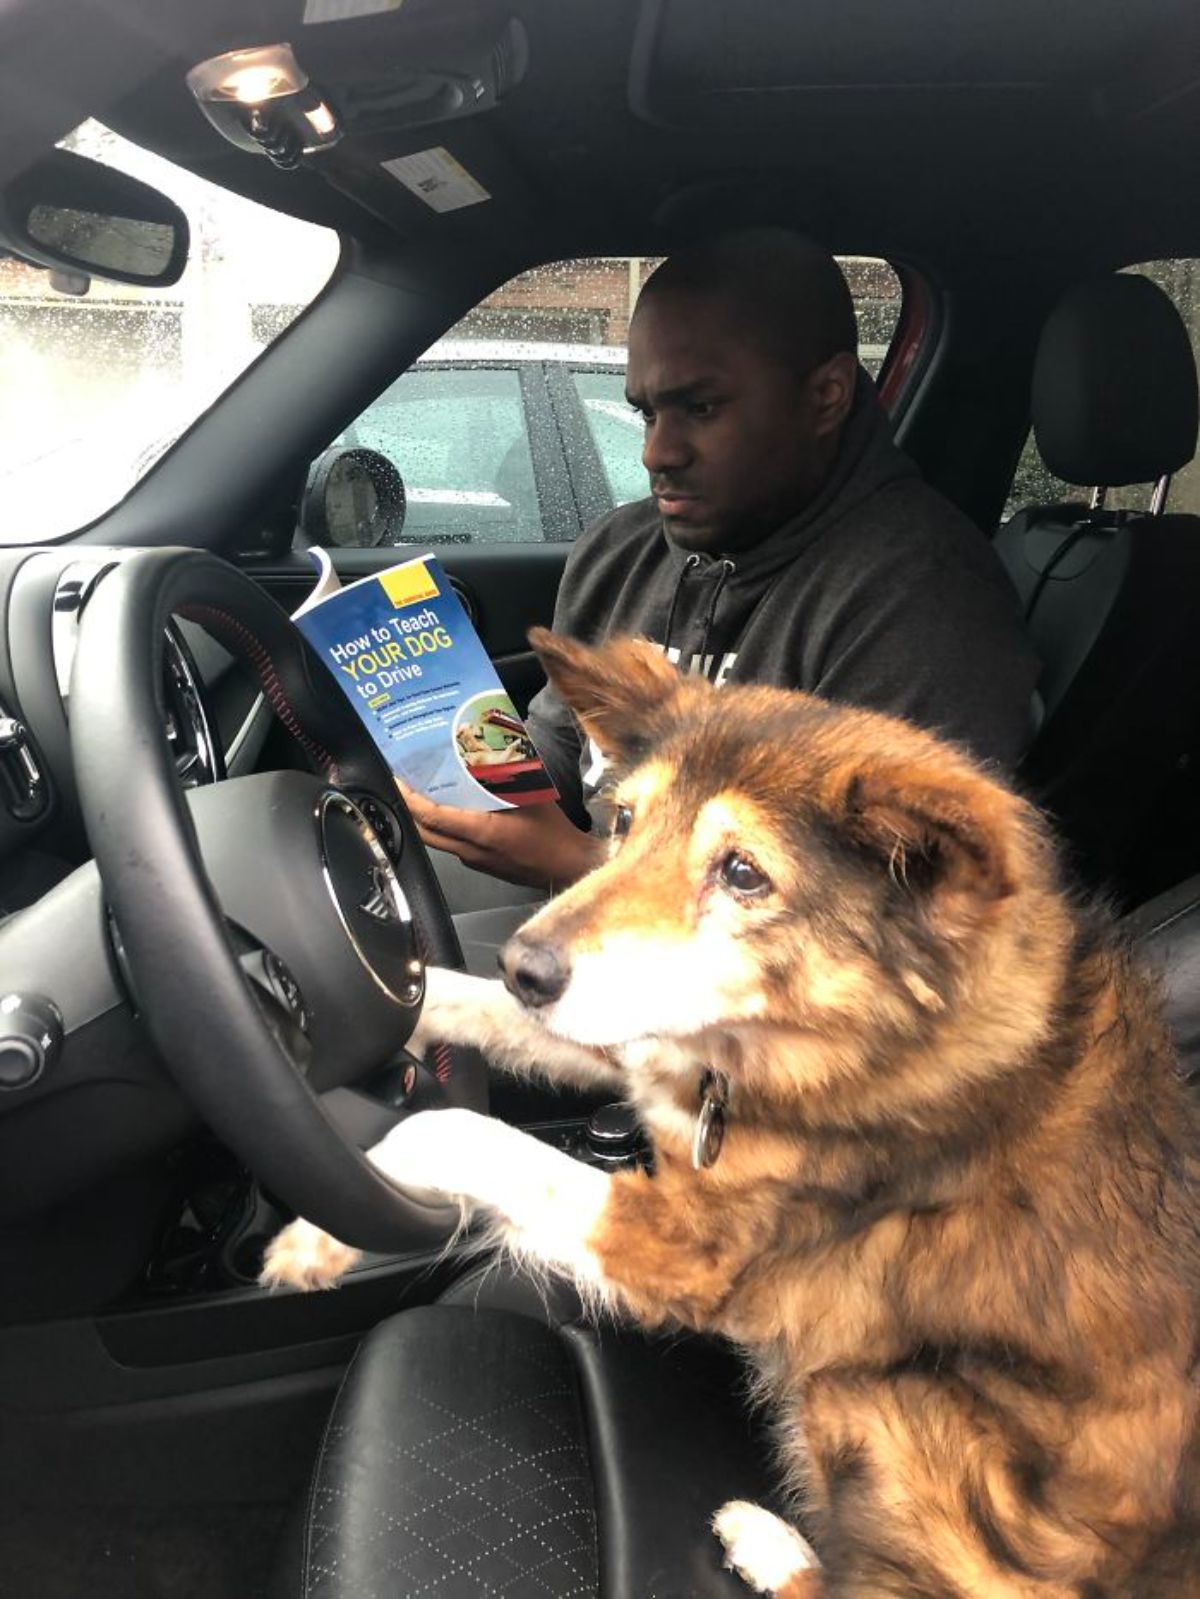 old fluffy brown dog sitting in a driver's seat of a vehicle with a man next to it reading a book called Hot to Teach YOUR DOG to Drive